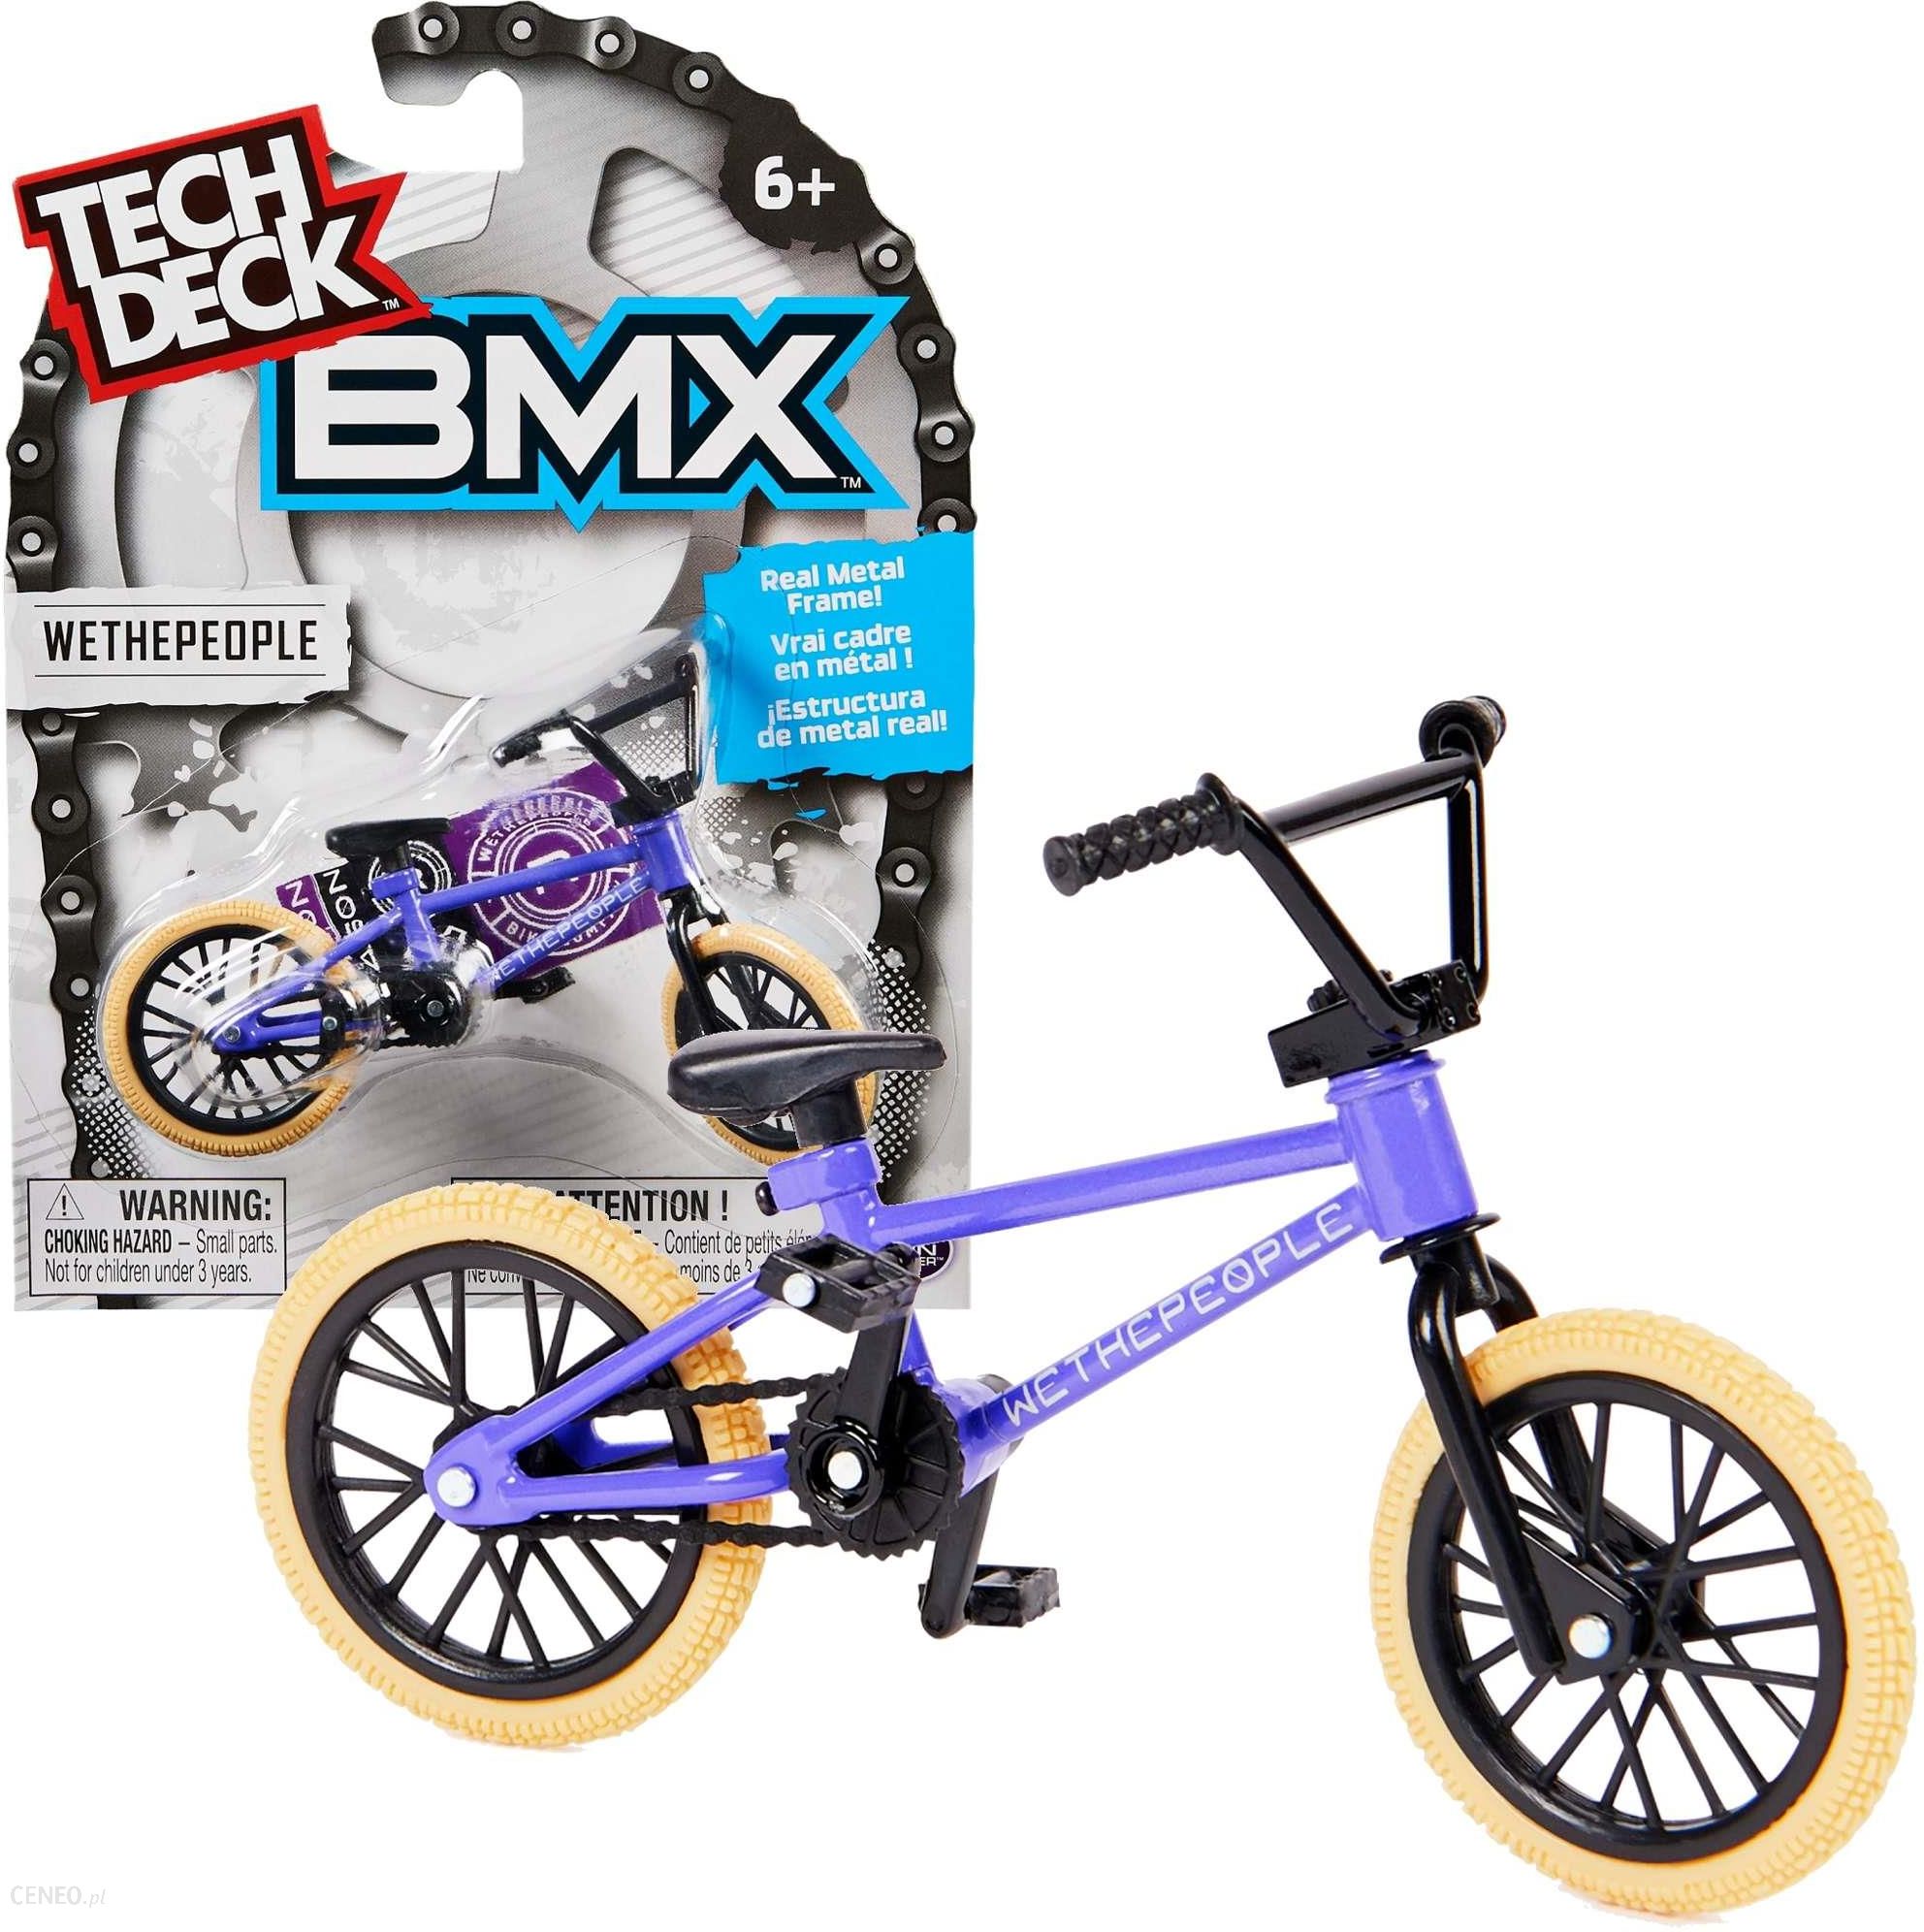 https://image.ceneostatic.pl/data/products/133622005/i-spin-master-tech-deck-fingerbike-bmx-rower-wethepeople.jpg